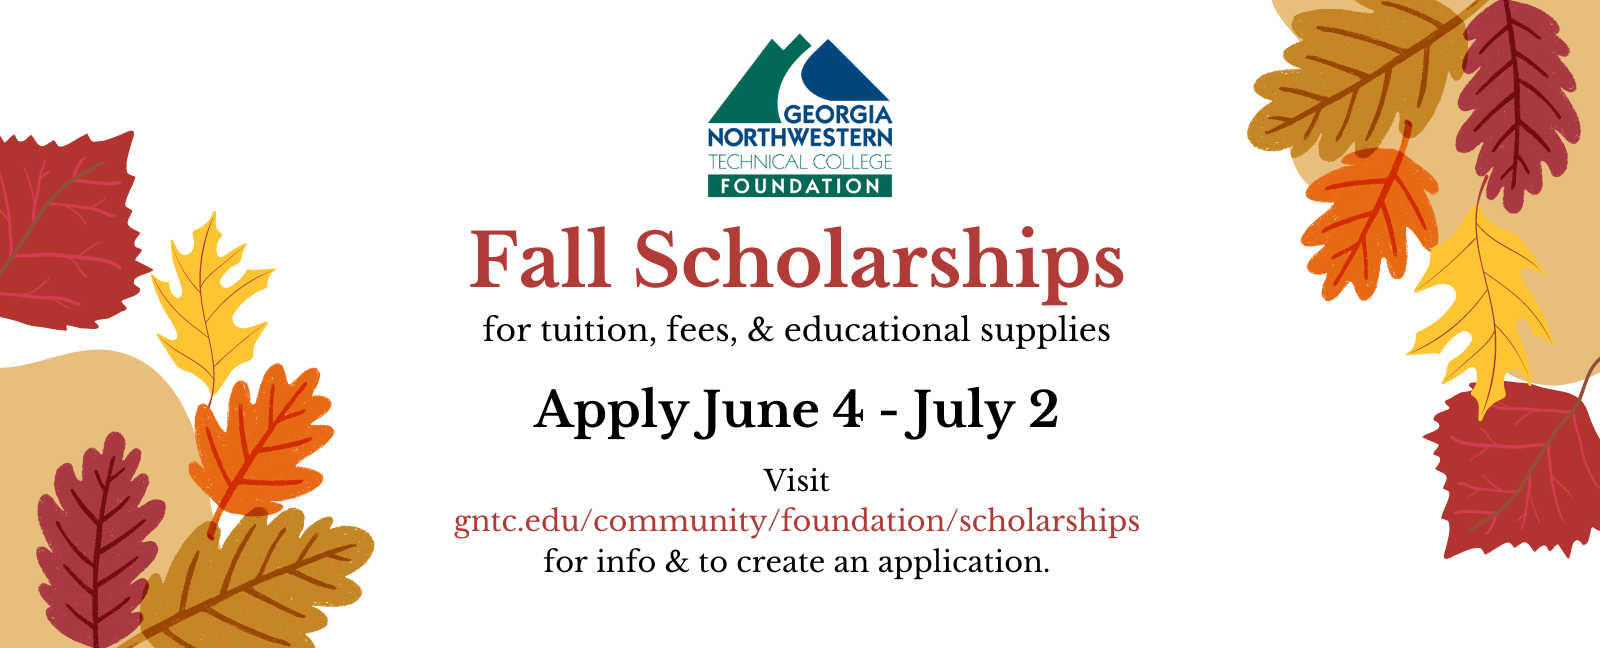 GNTC Foundation Fall Scholarships for tuition, fees, and educational supplies 
Apply June 4-July2
visit gntc.edu/community/founcation/scholarships for info and to create an application